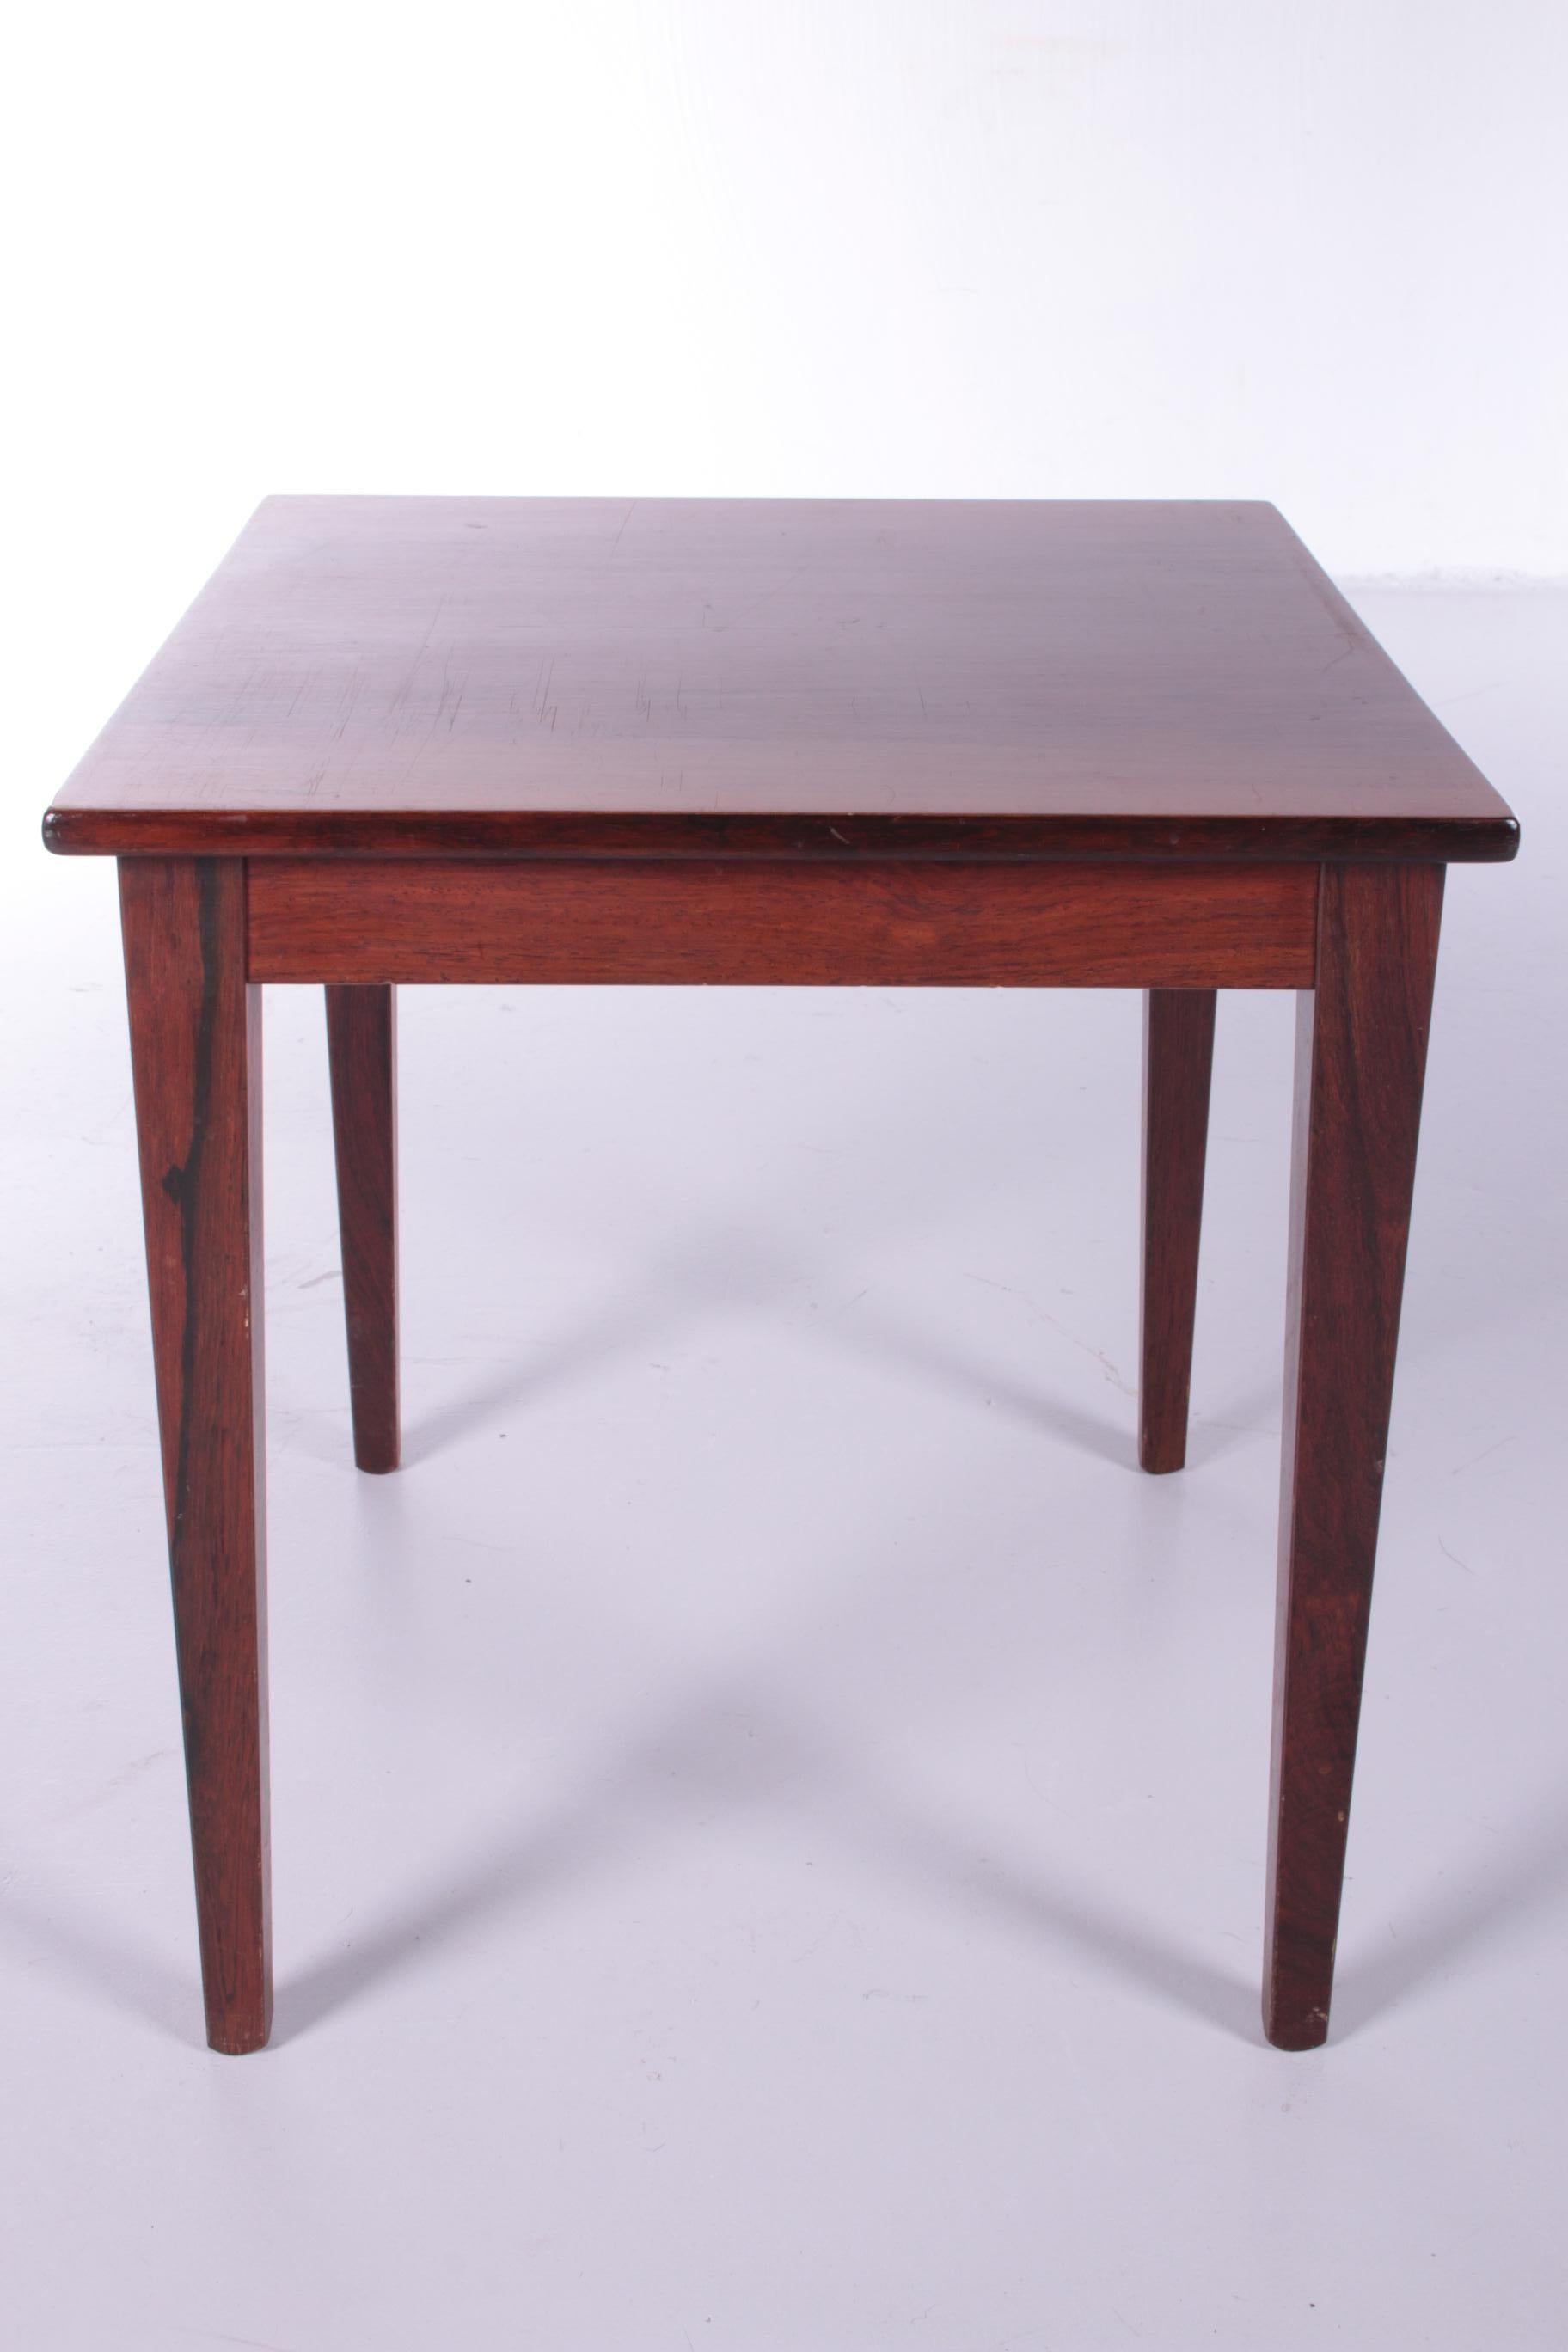 Mid-Century Modern Darkwood Side Table from Denmark, 1960s For Sale